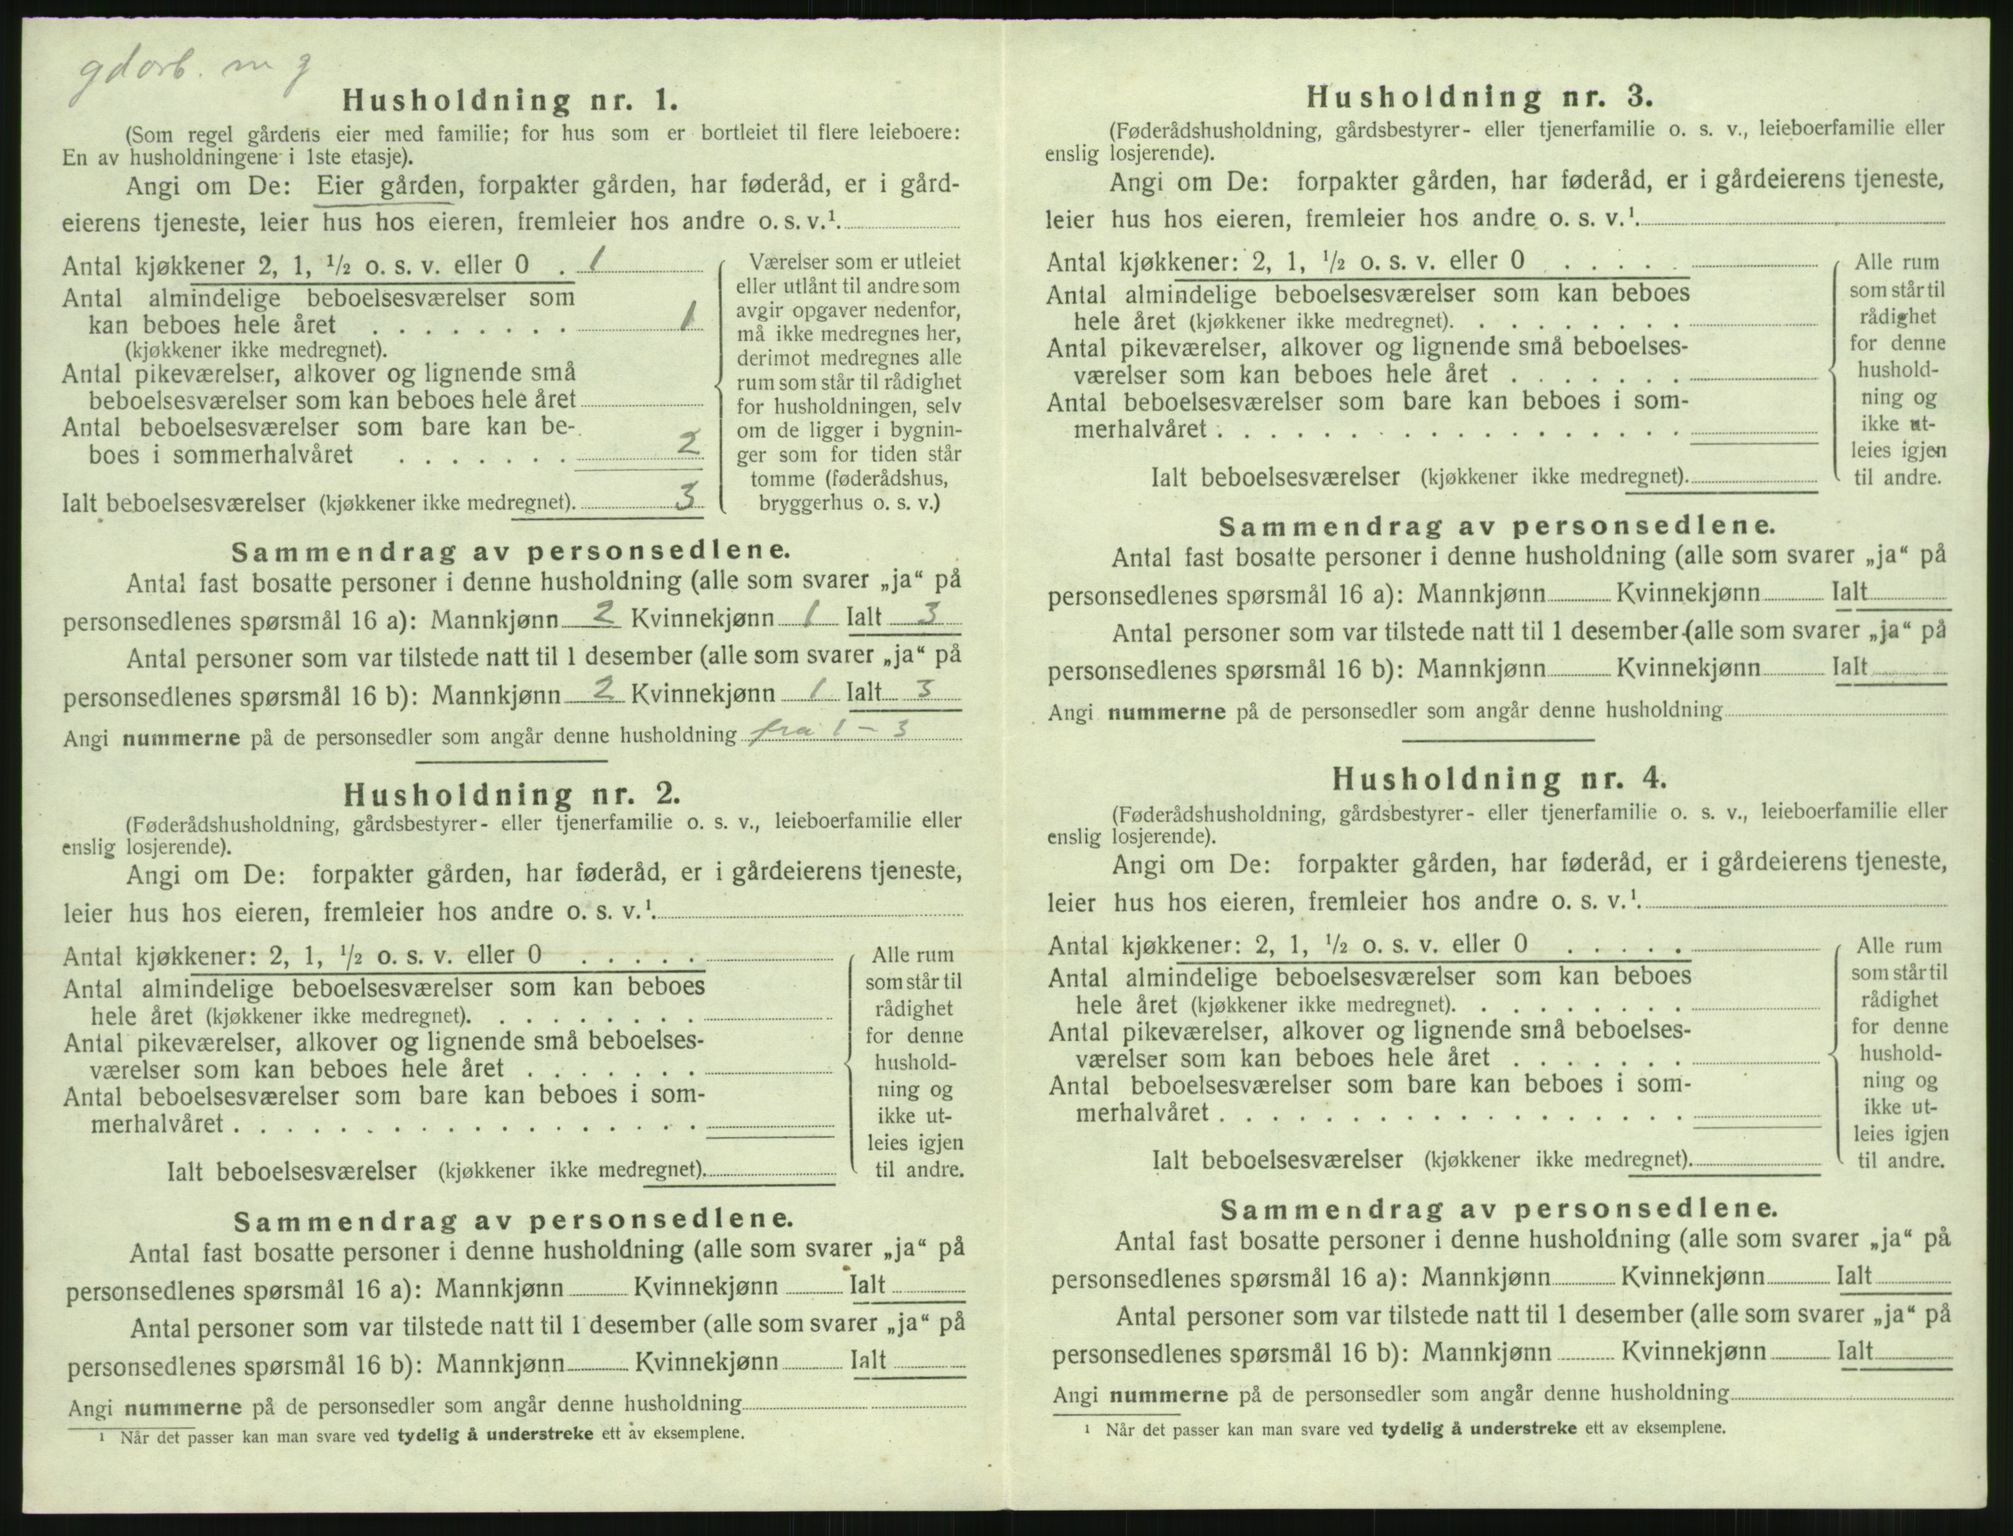 SAST, 1920 census for Time, 1920, p. 466